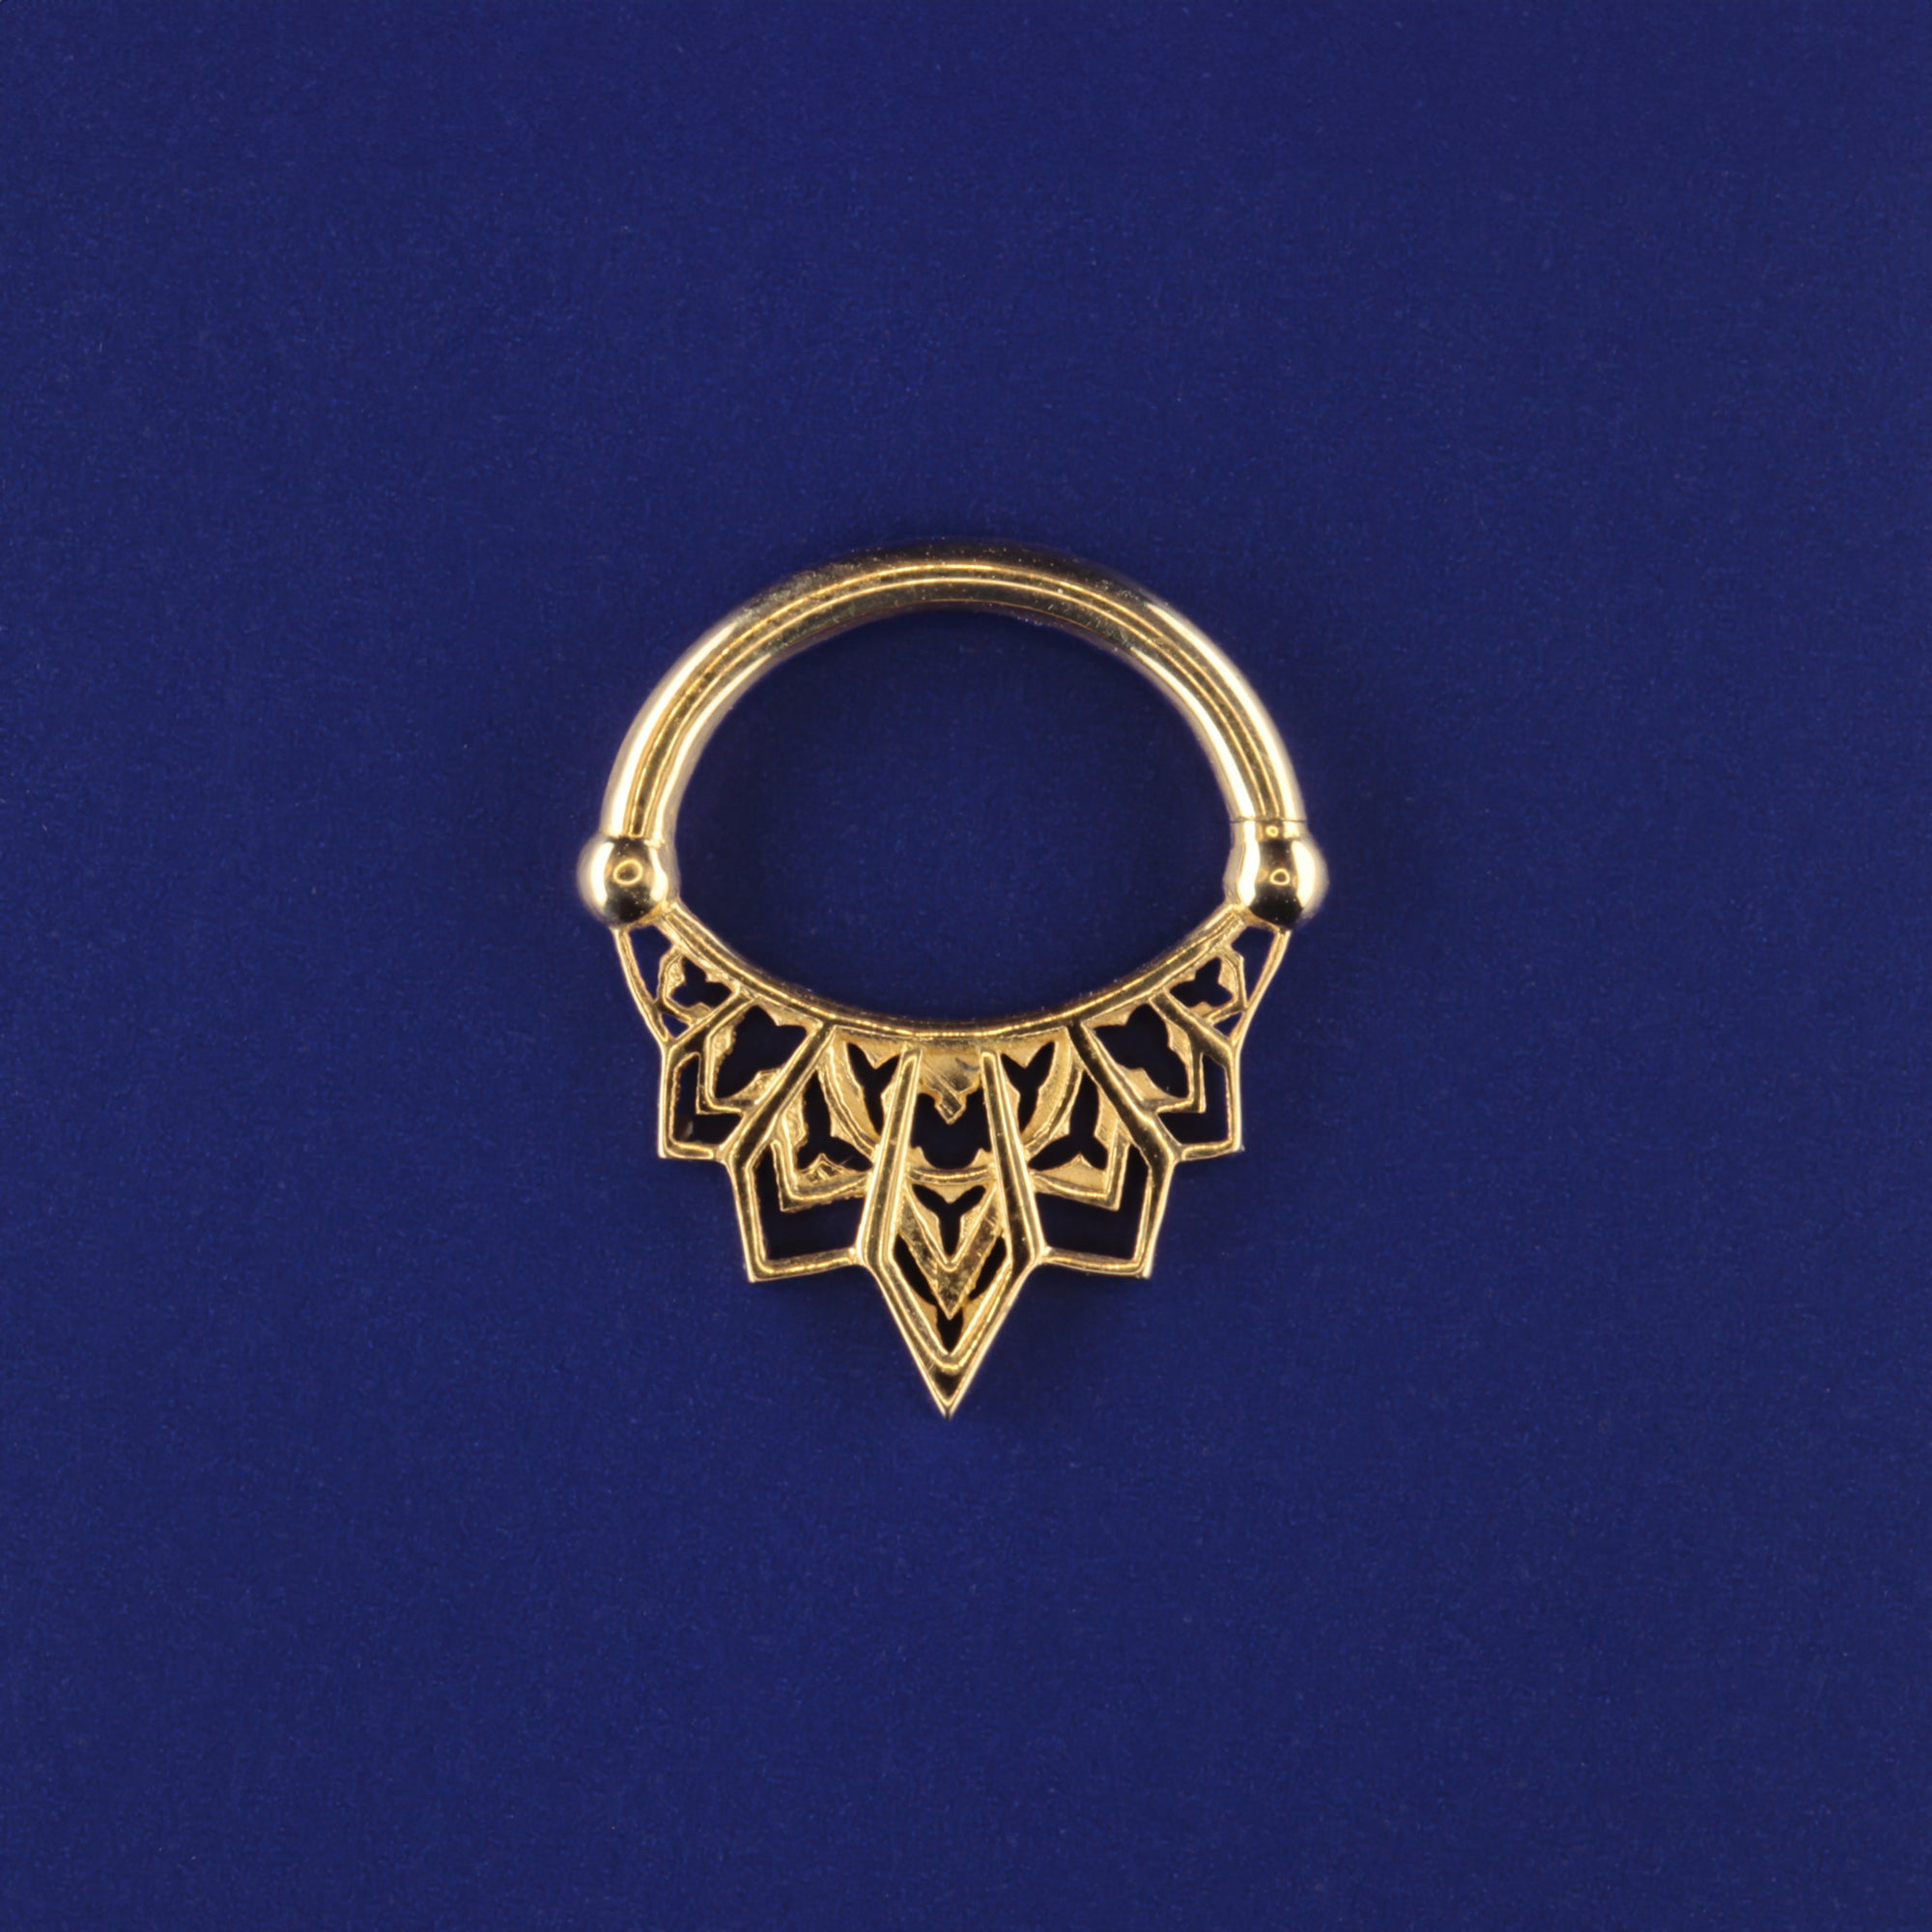 18k yellow gold custom piercing ring inspired by Gothic architecture